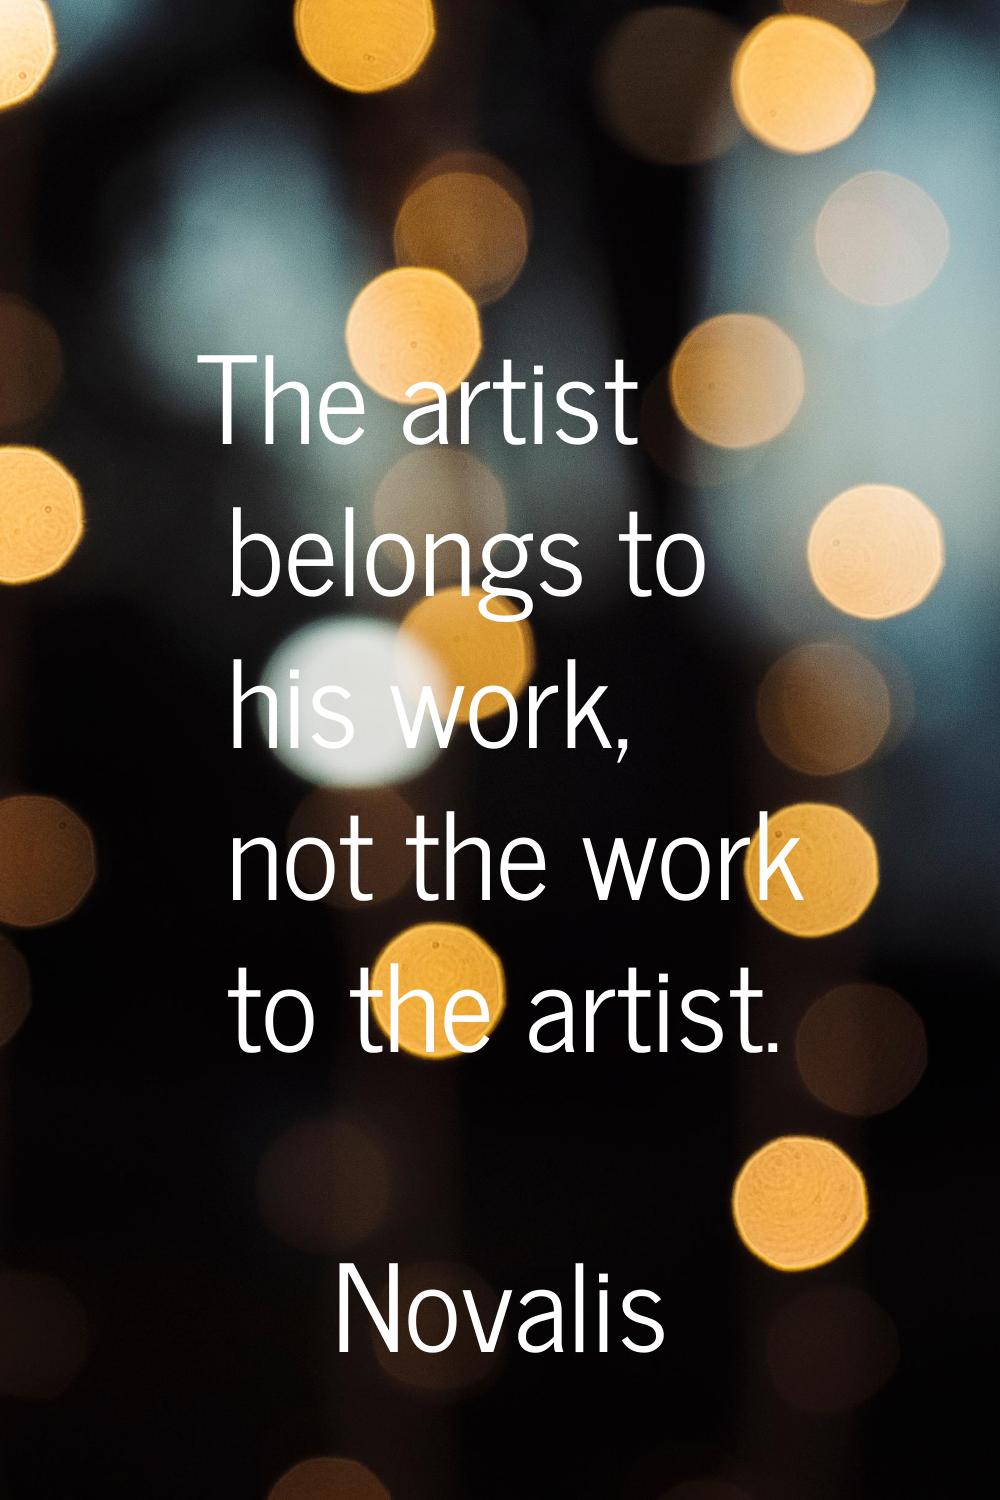 The artist belongs to his work, not the work to the artist.